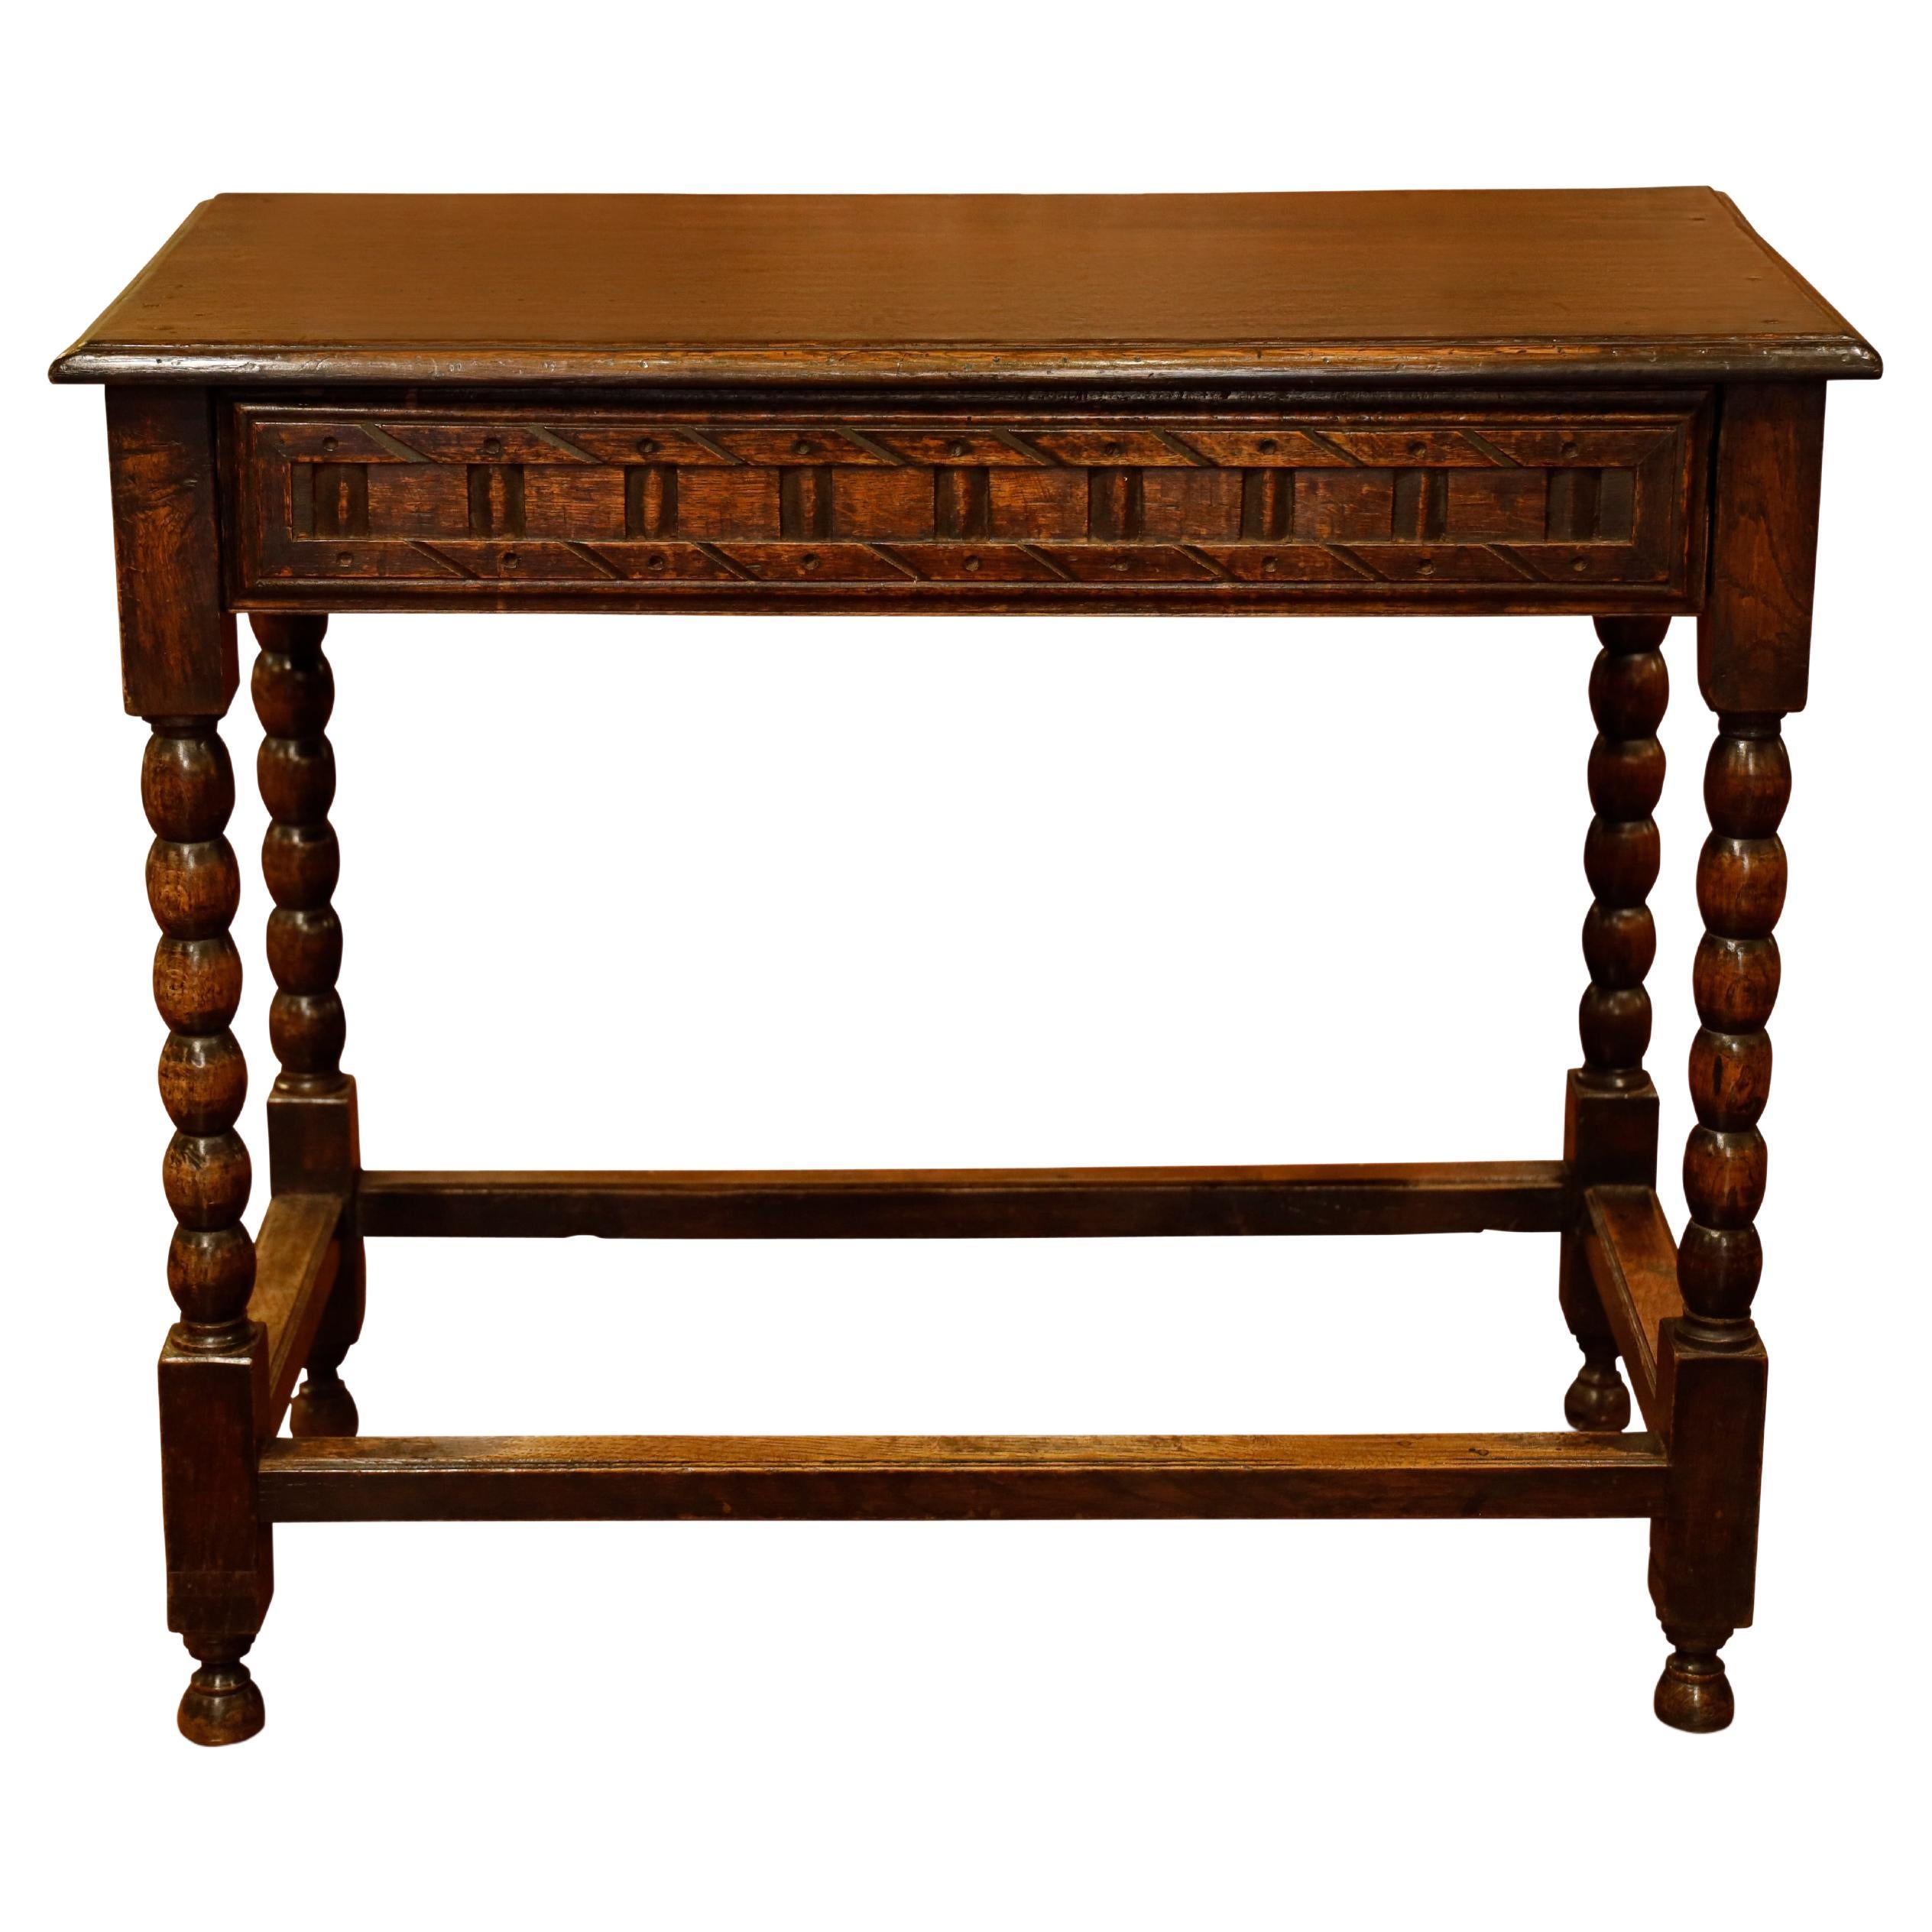 19th Century English Oak Carved Side Table